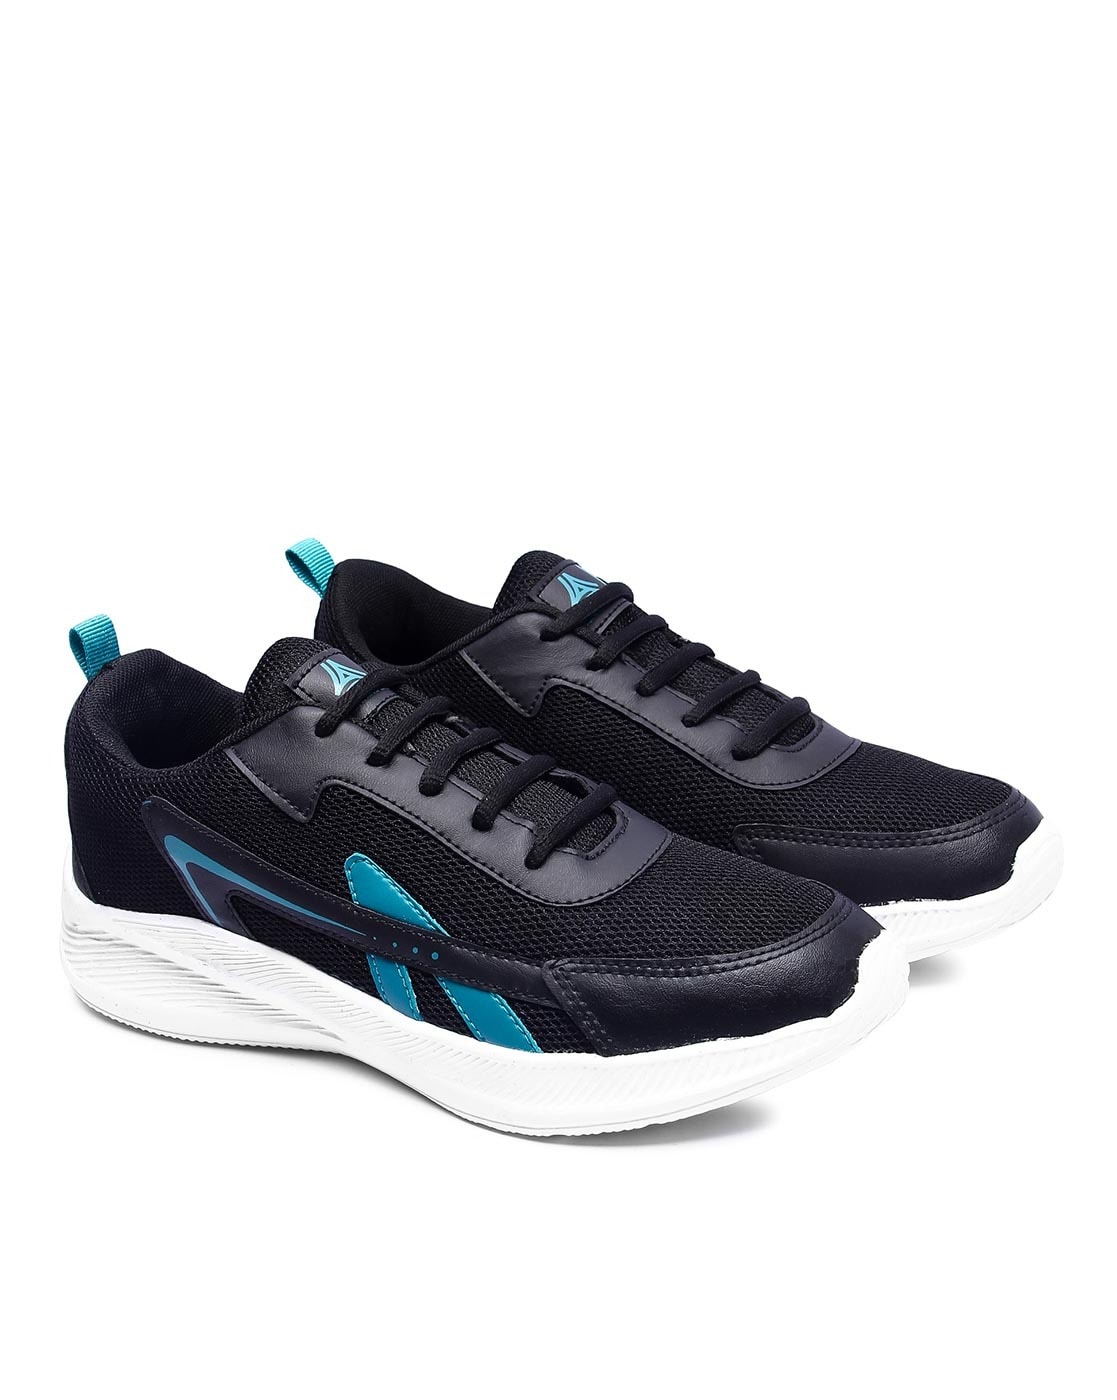 Buy Bluechief Men's Running Sport Shoes (Sport Shoes 1000-1000 under-200-200  price-200 rs-2000 price-2018-299-300-300 under-300 under  men-300-700-350-400-499-500-500 only-500 rupees-500 to 1000-500 under-branded-discount-in  low price-jogging ...